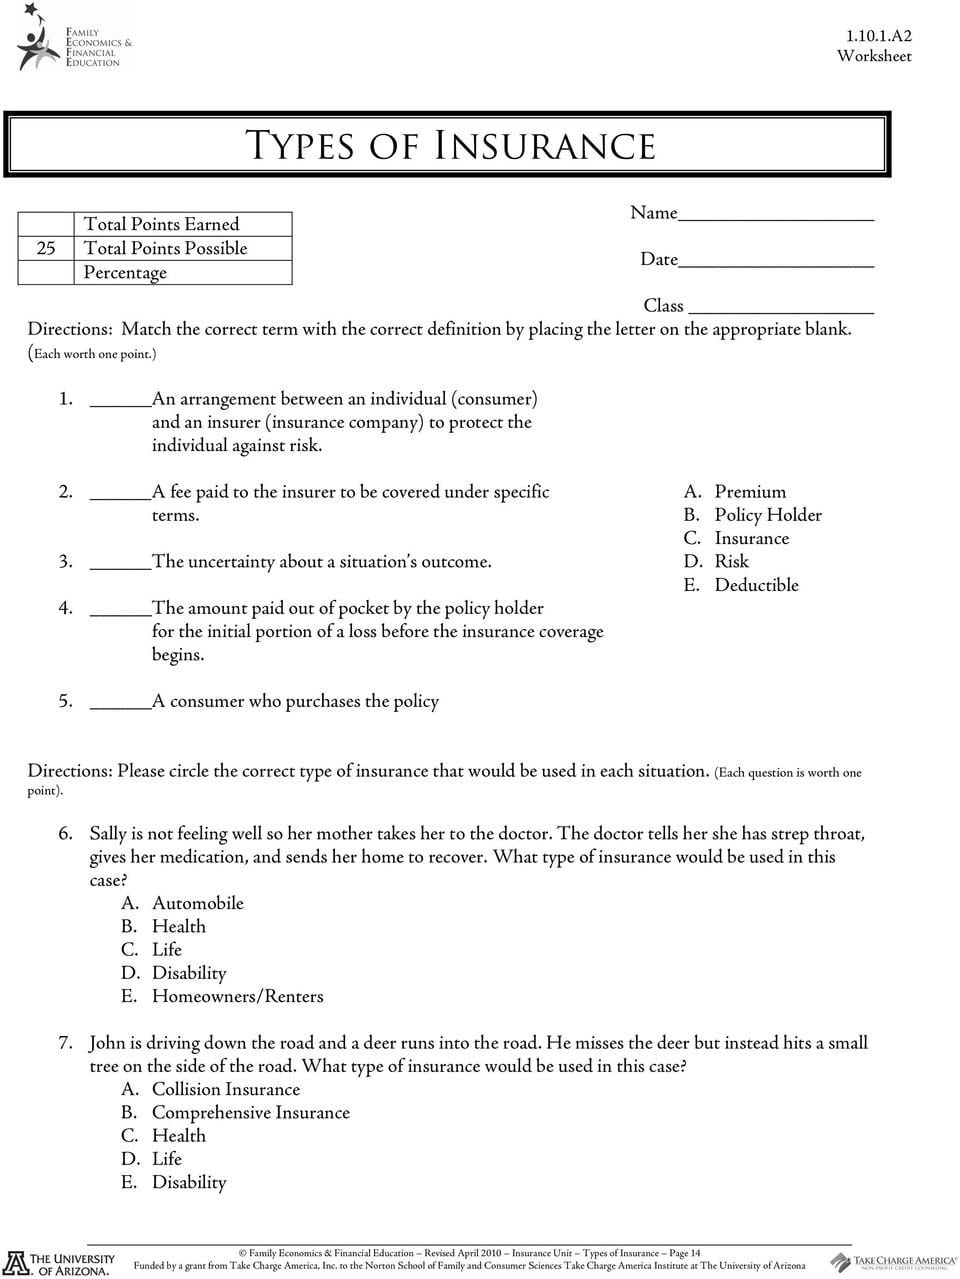 Automobile Insurance Automobile Insurance Answer Key Along With Types Of Insurance Worksheet 2 6 5 A4 Answers